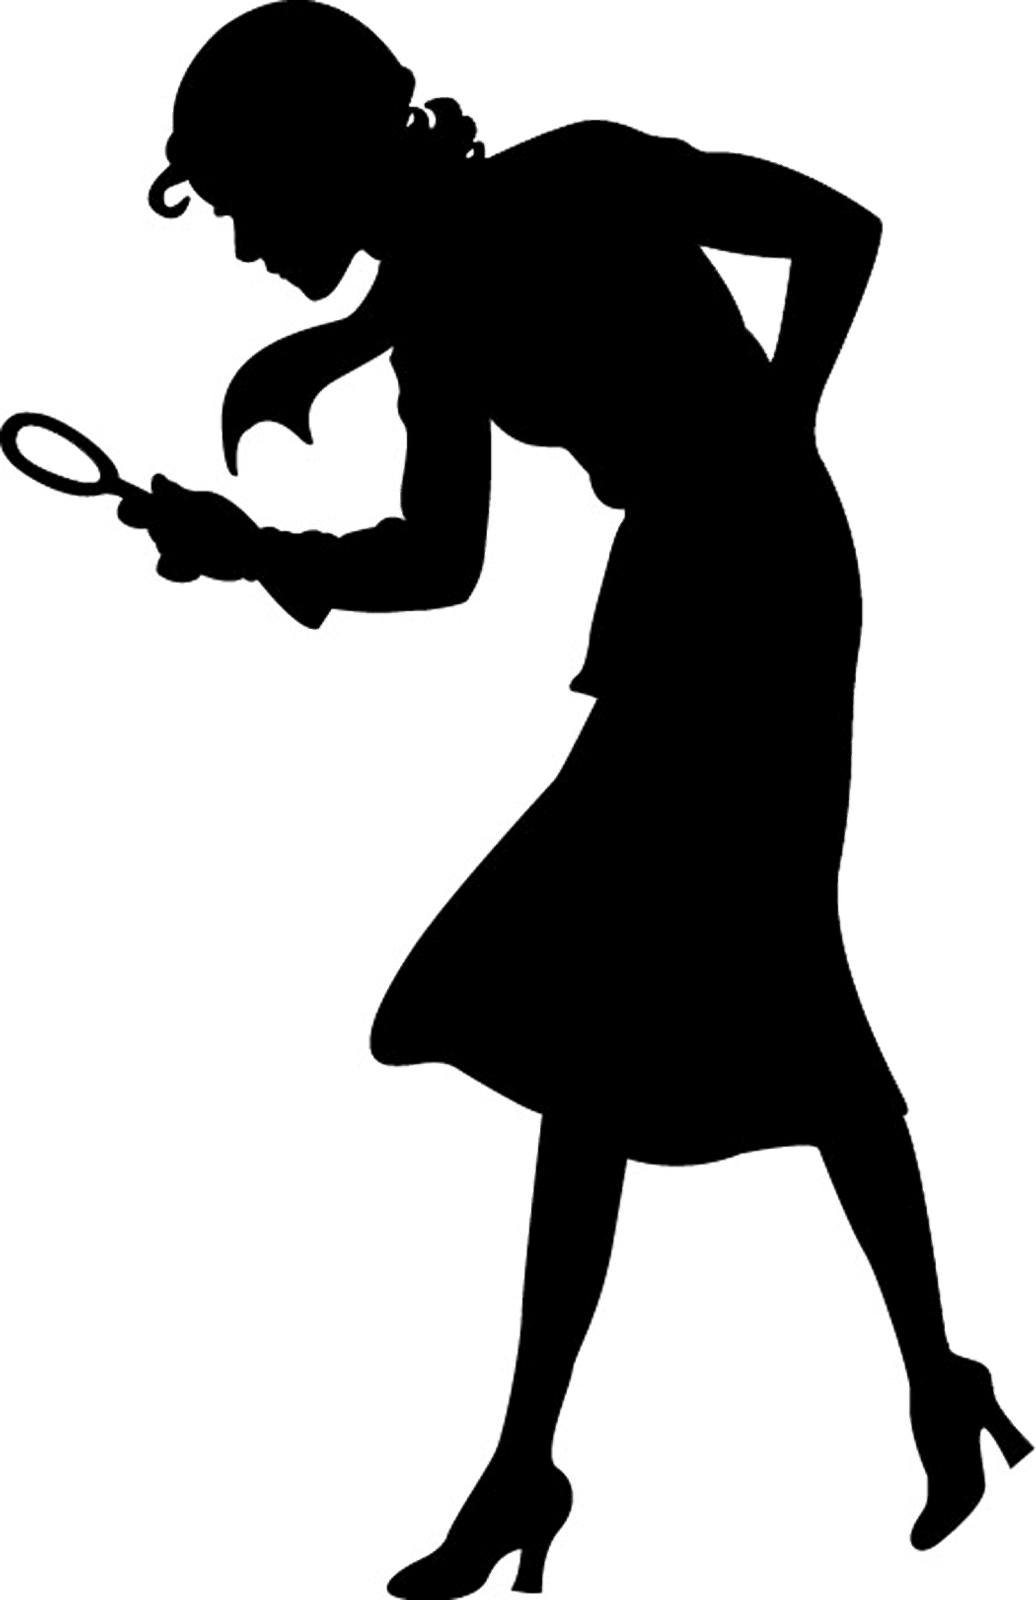 Nancy Drew Silhouette   Artsy   Pinterest   Detective Silhouette And